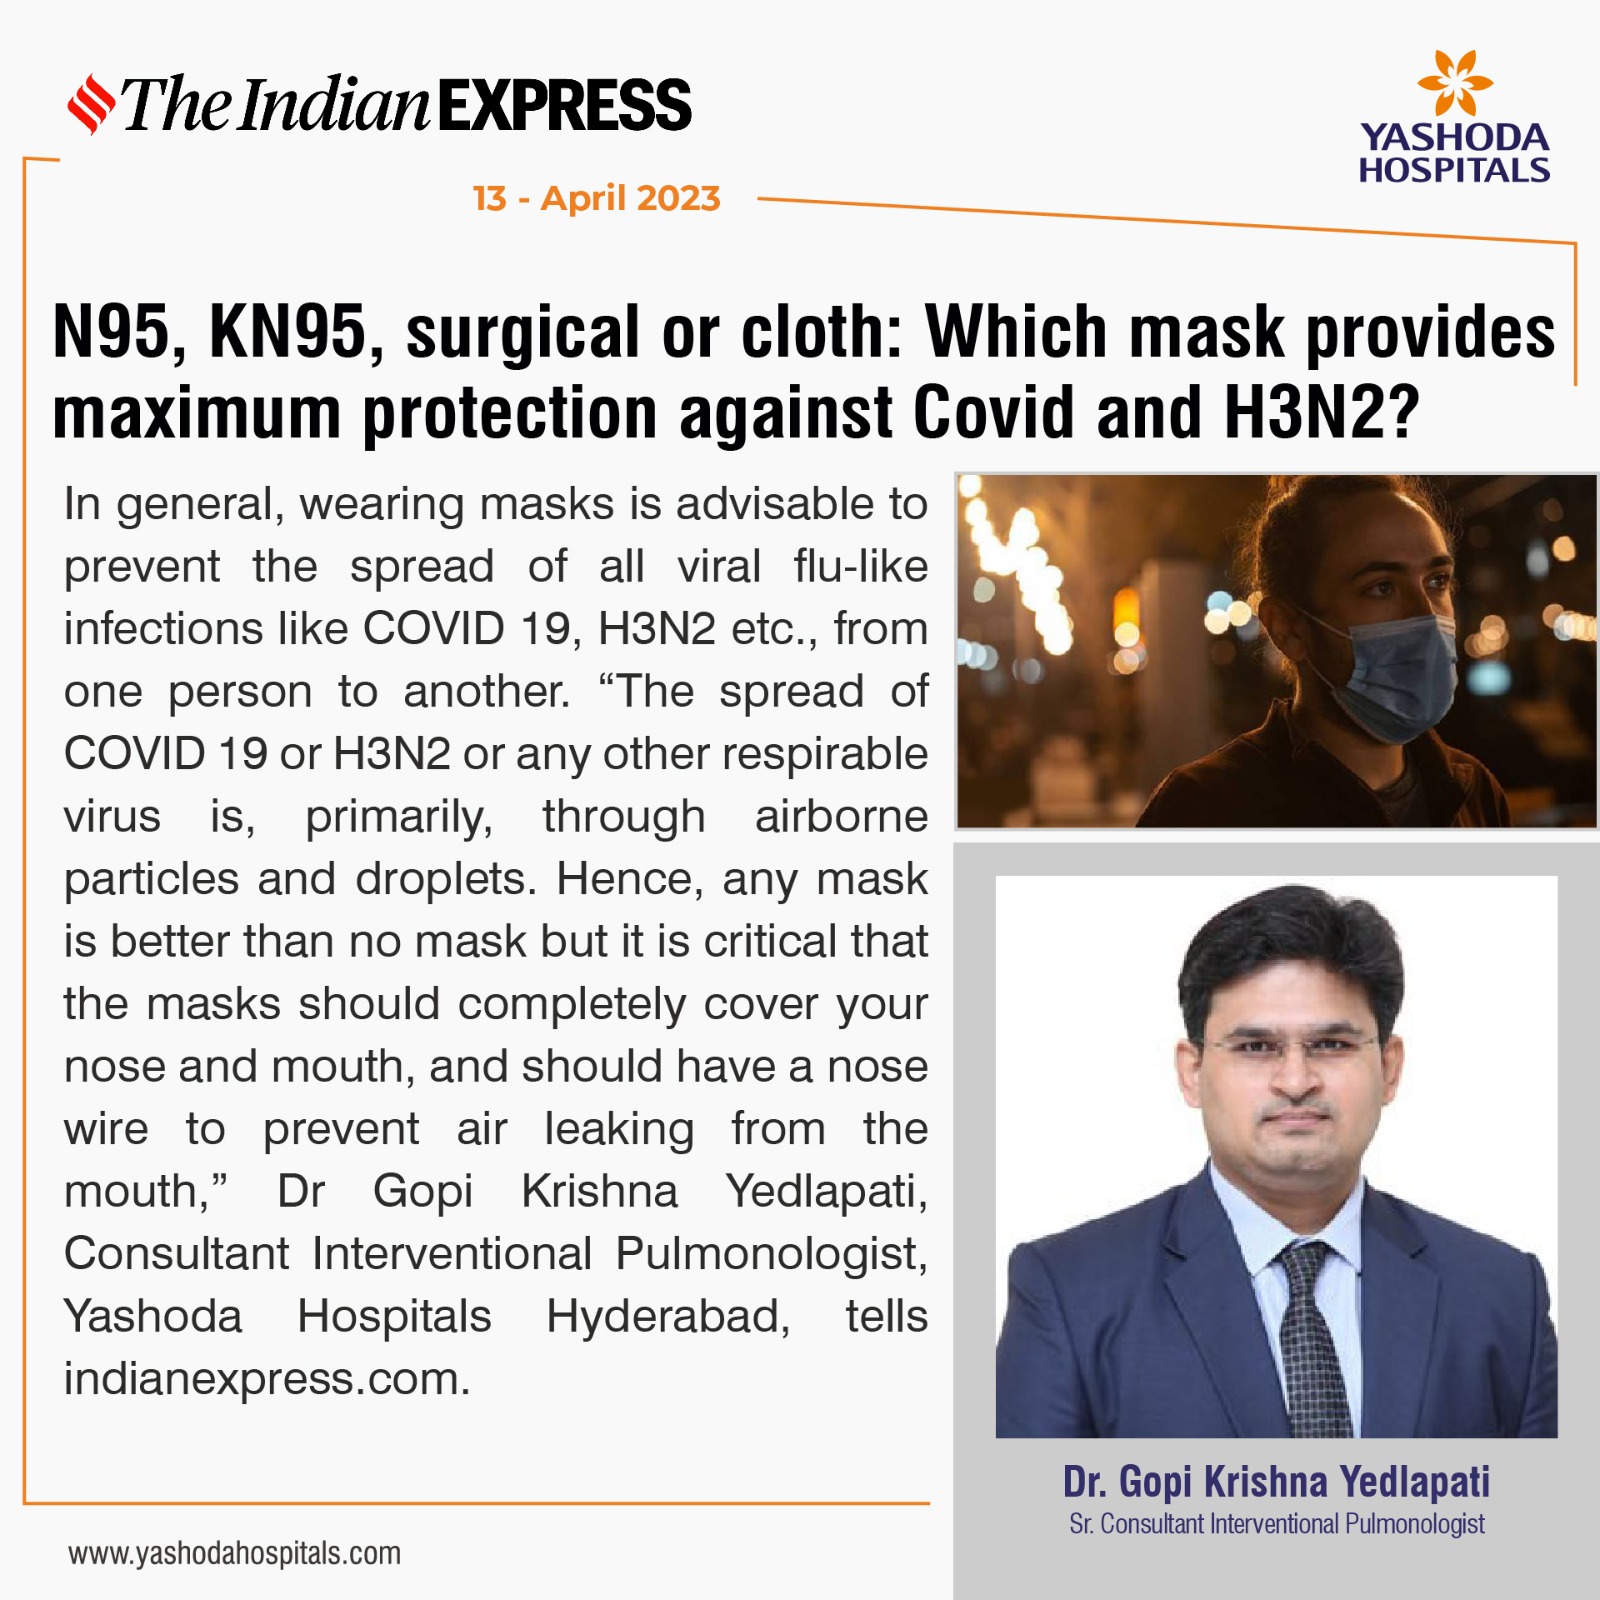 Which mask provides maximum protection against Covid and H3N2?